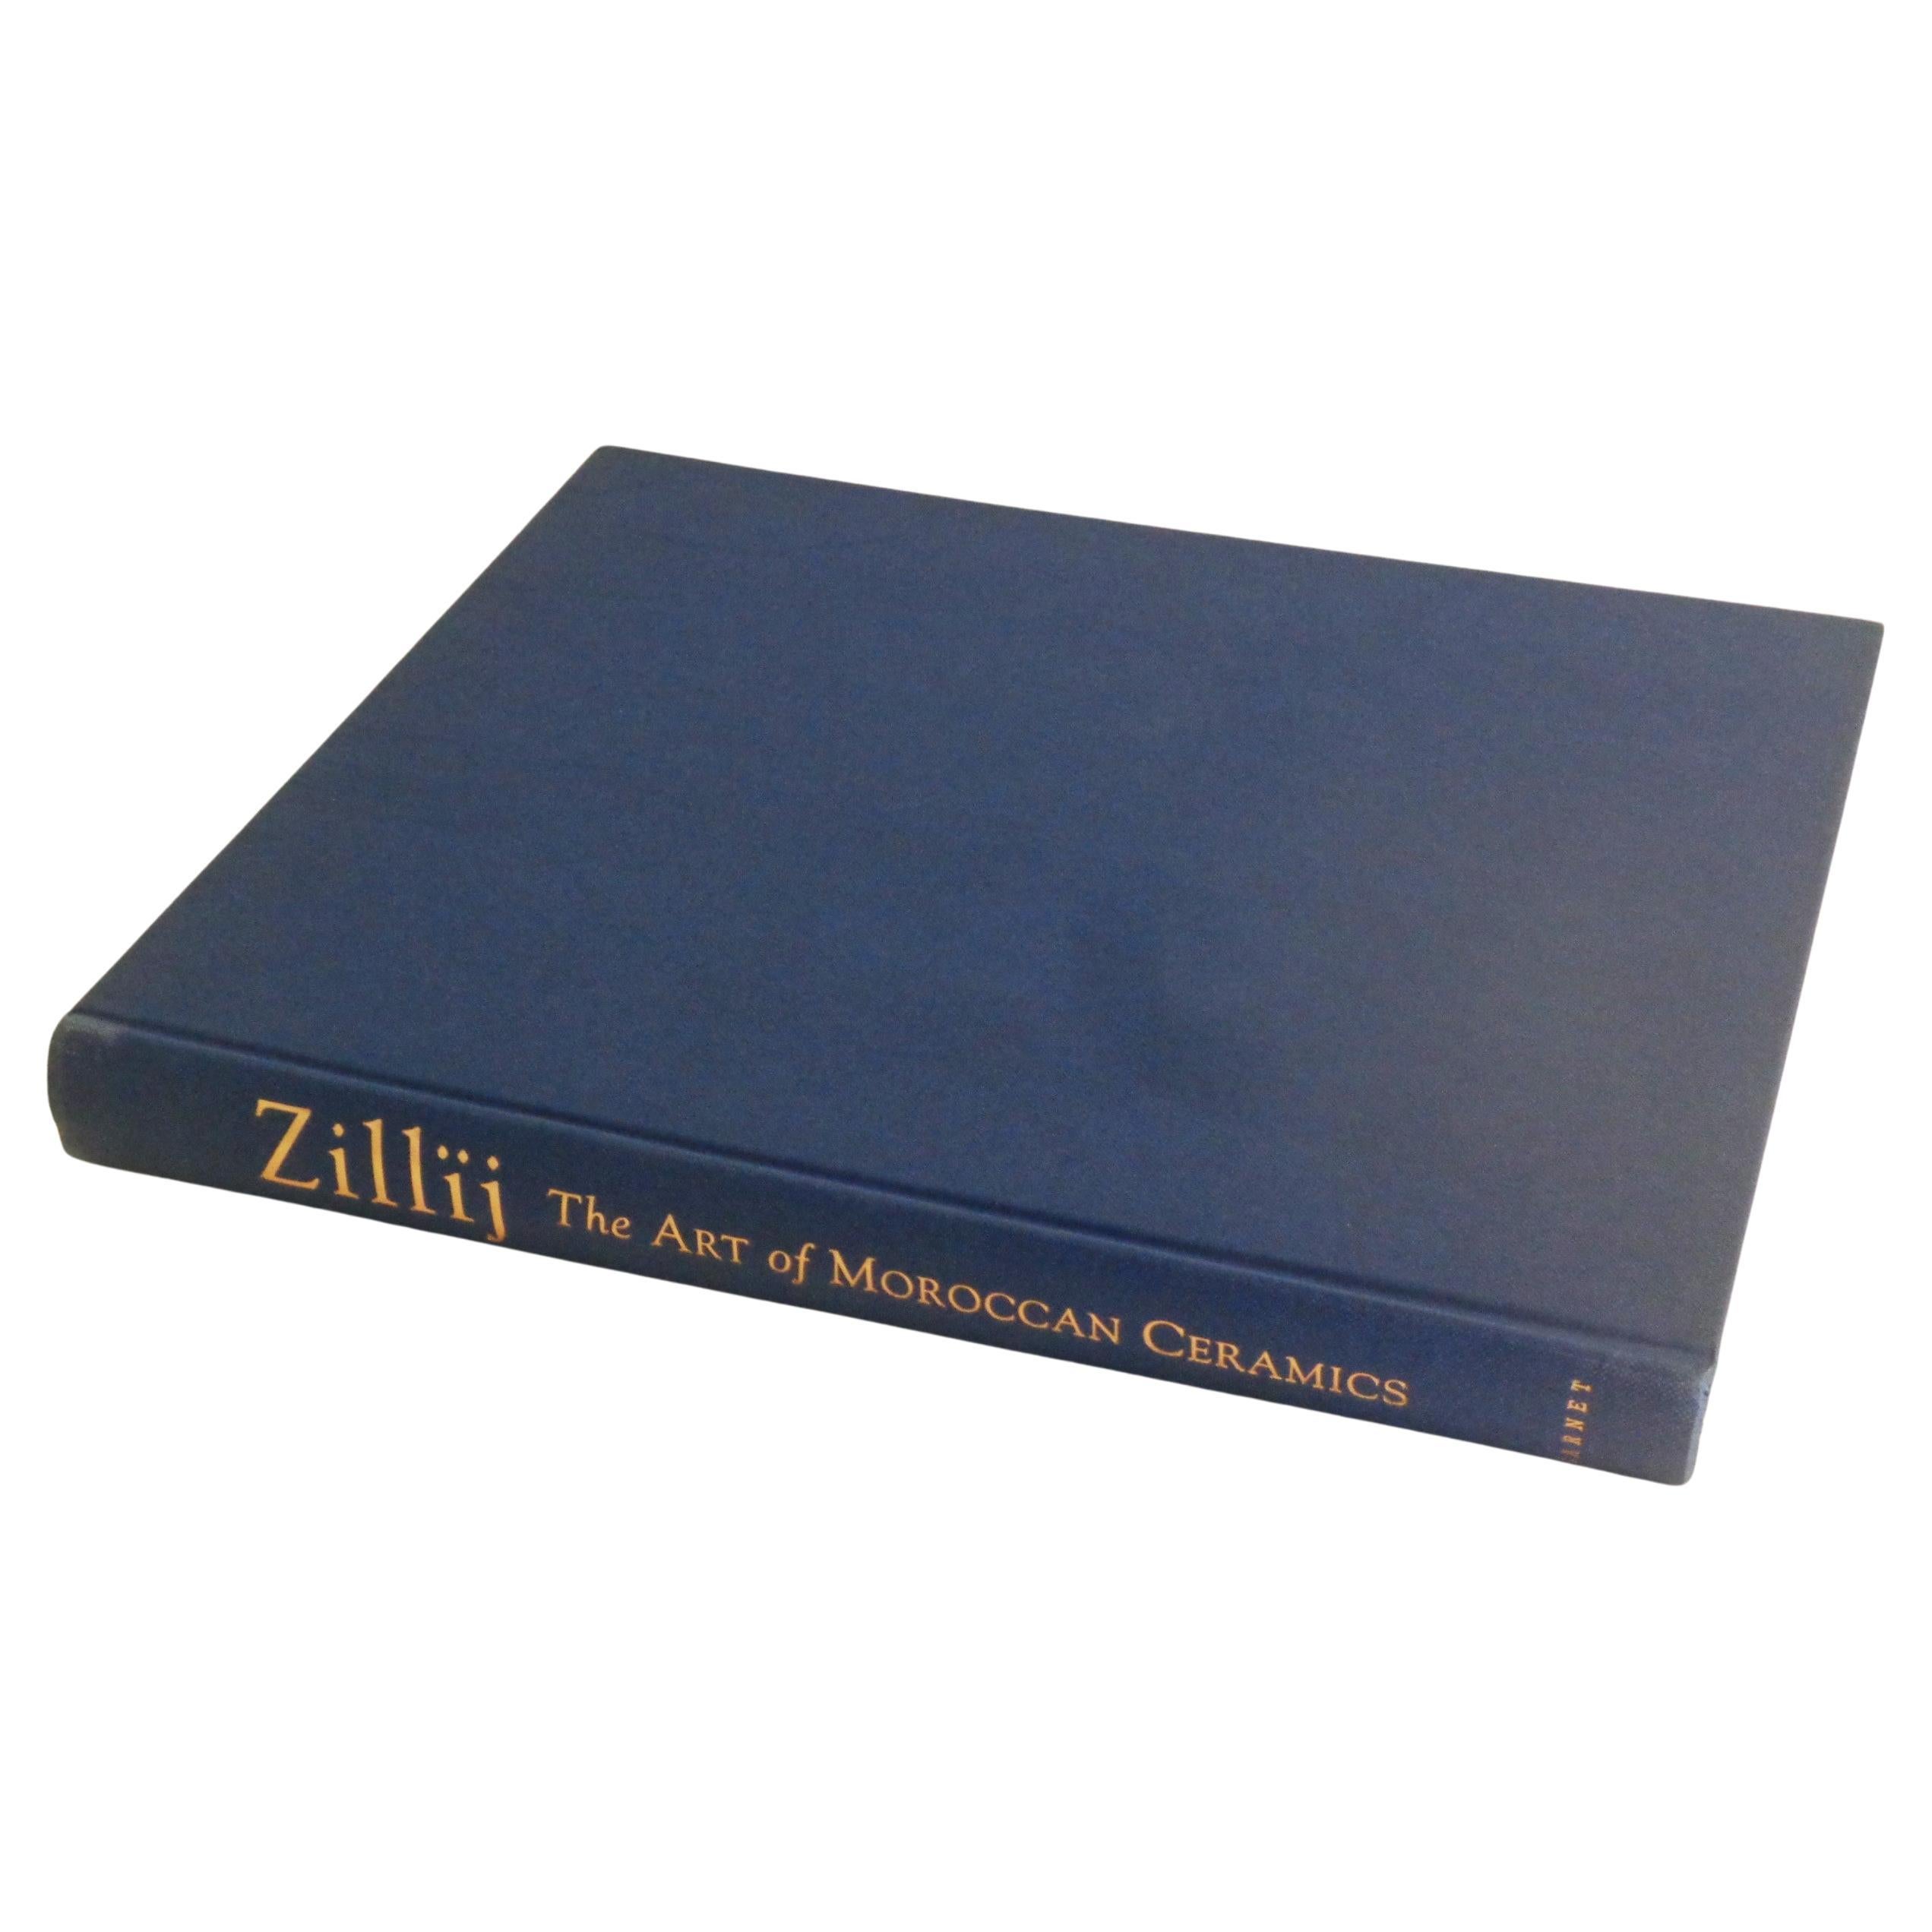 Zillij - The Art of Moroccan Ceramics - John Hedgecoe & Salma Samar Dumluji - 1992 Garnet Publishing Limited, United Kingdom. Large blue hardcover cloth book w/ gilt lettering and dustjacket. English text. 352 pages w/ richly colored architectural